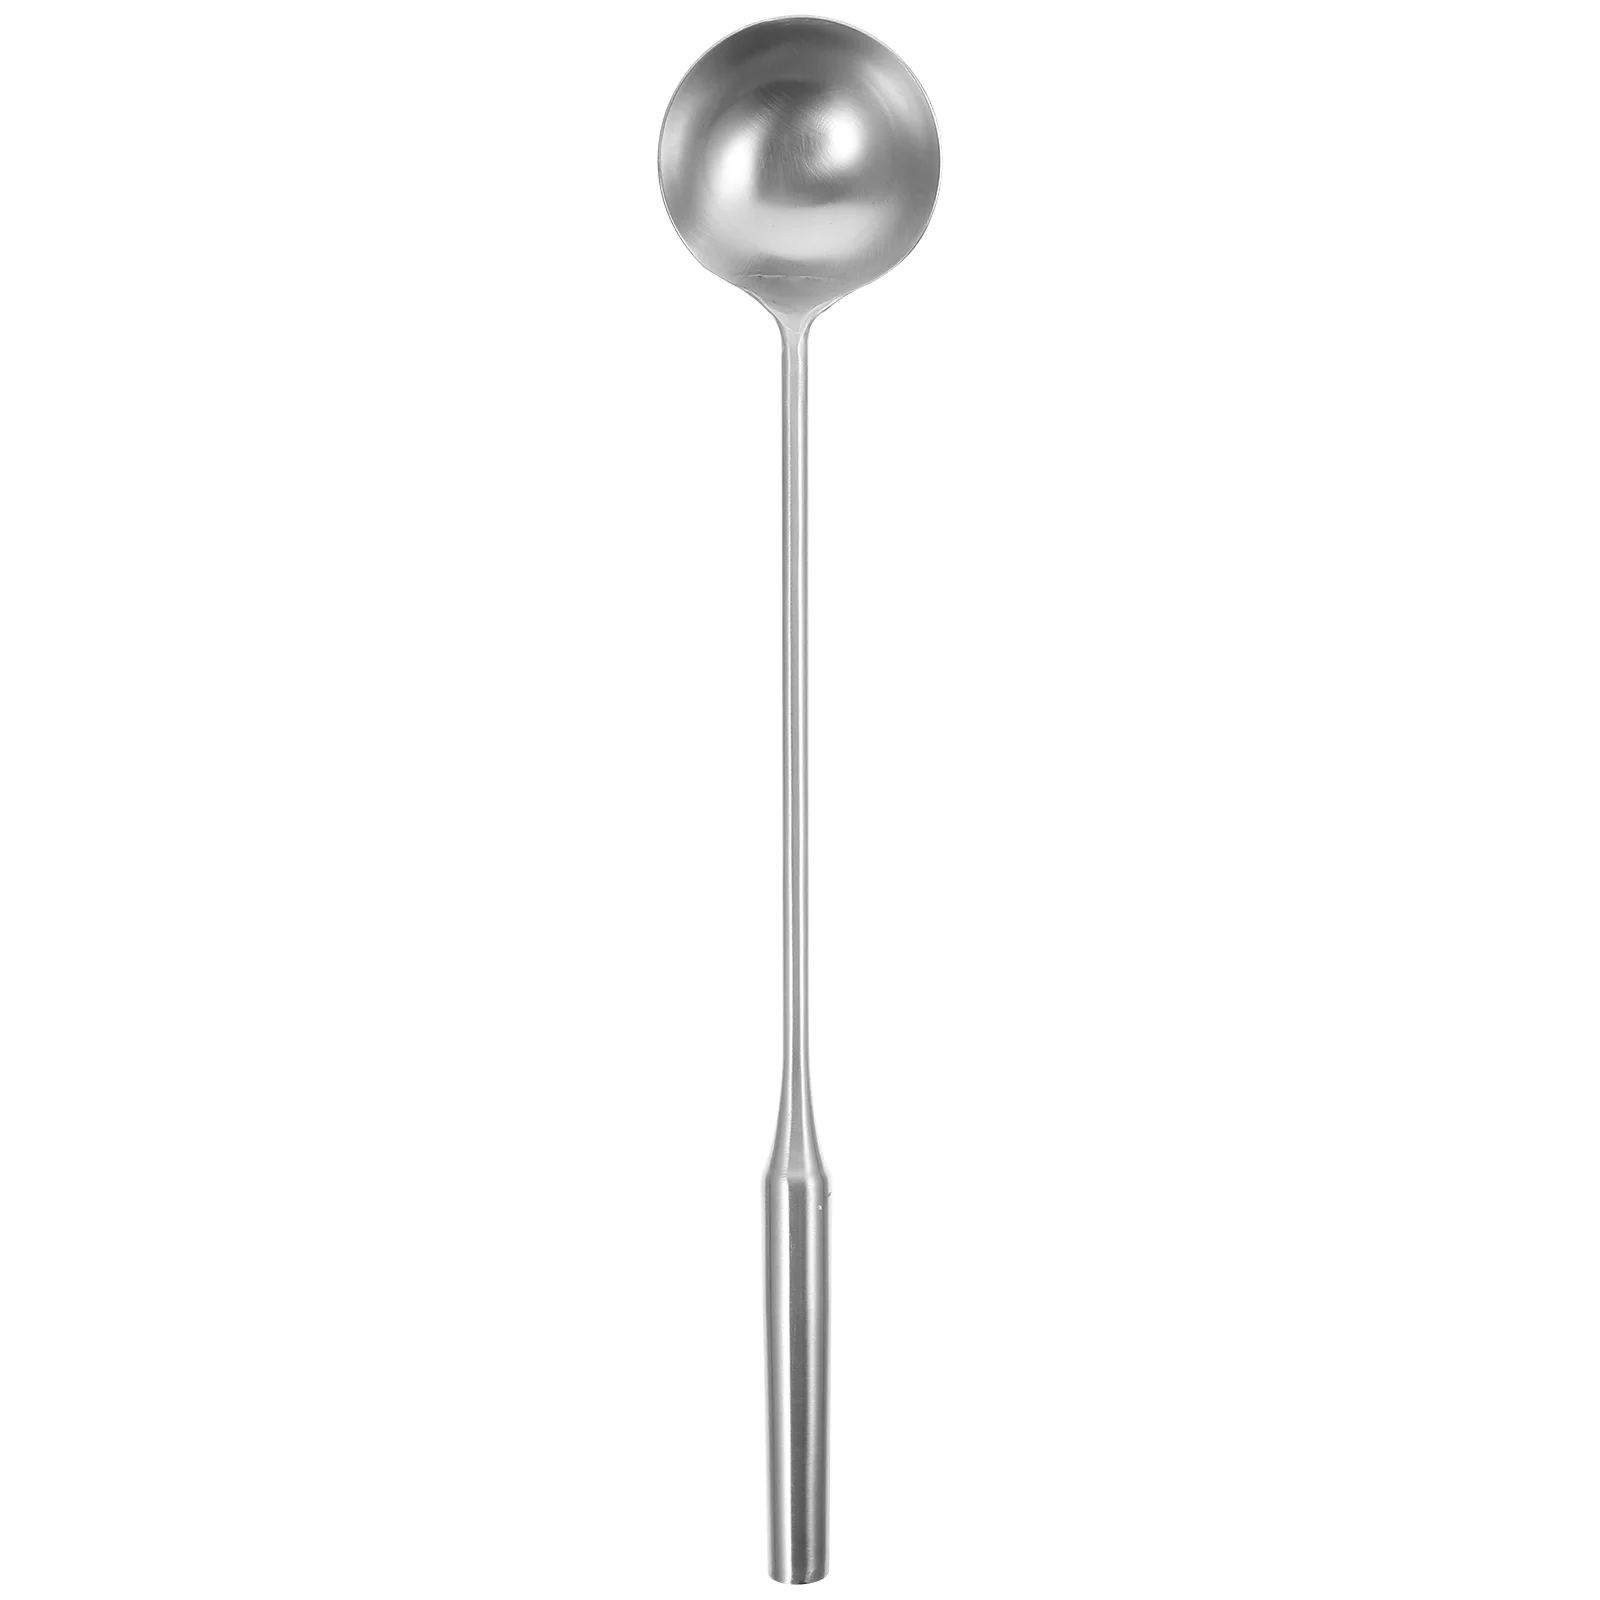 

Ladle Spoon Soup Kitchen Wok Utensils Steel Serving Cooking Stainless Water Spoons Dipper Accessories Sauces Ladles Metal Gravy